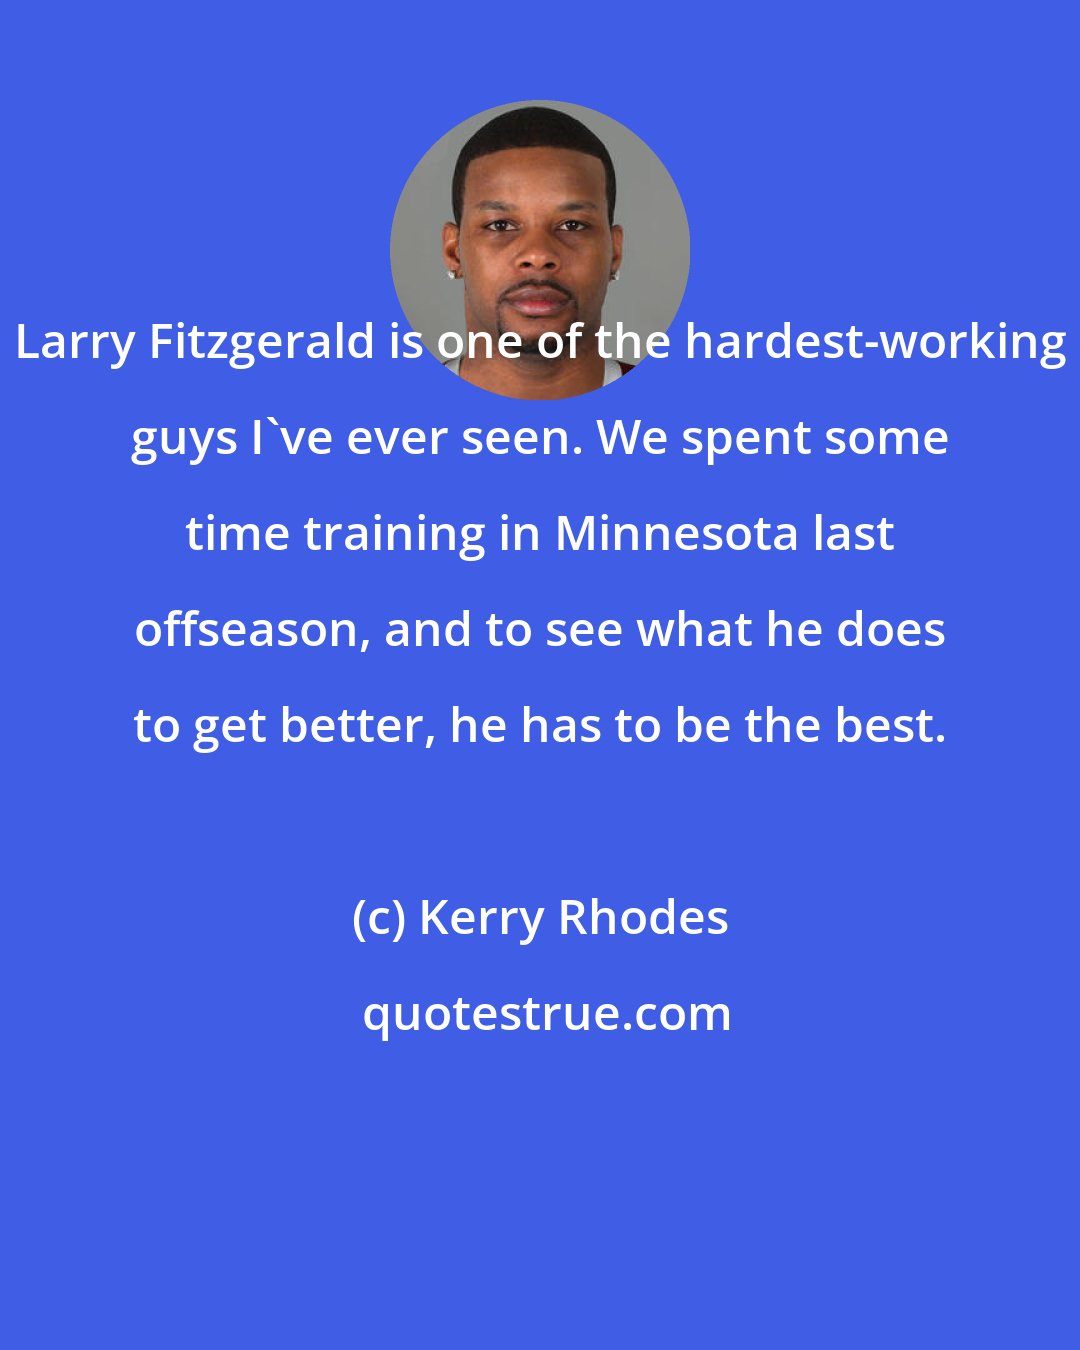 Kerry Rhodes: Larry Fitzgerald is one of the hardest-working guys I've ever seen. We spent some time training in Minnesota last offseason, and to see what he does to get better, he has to be the best.